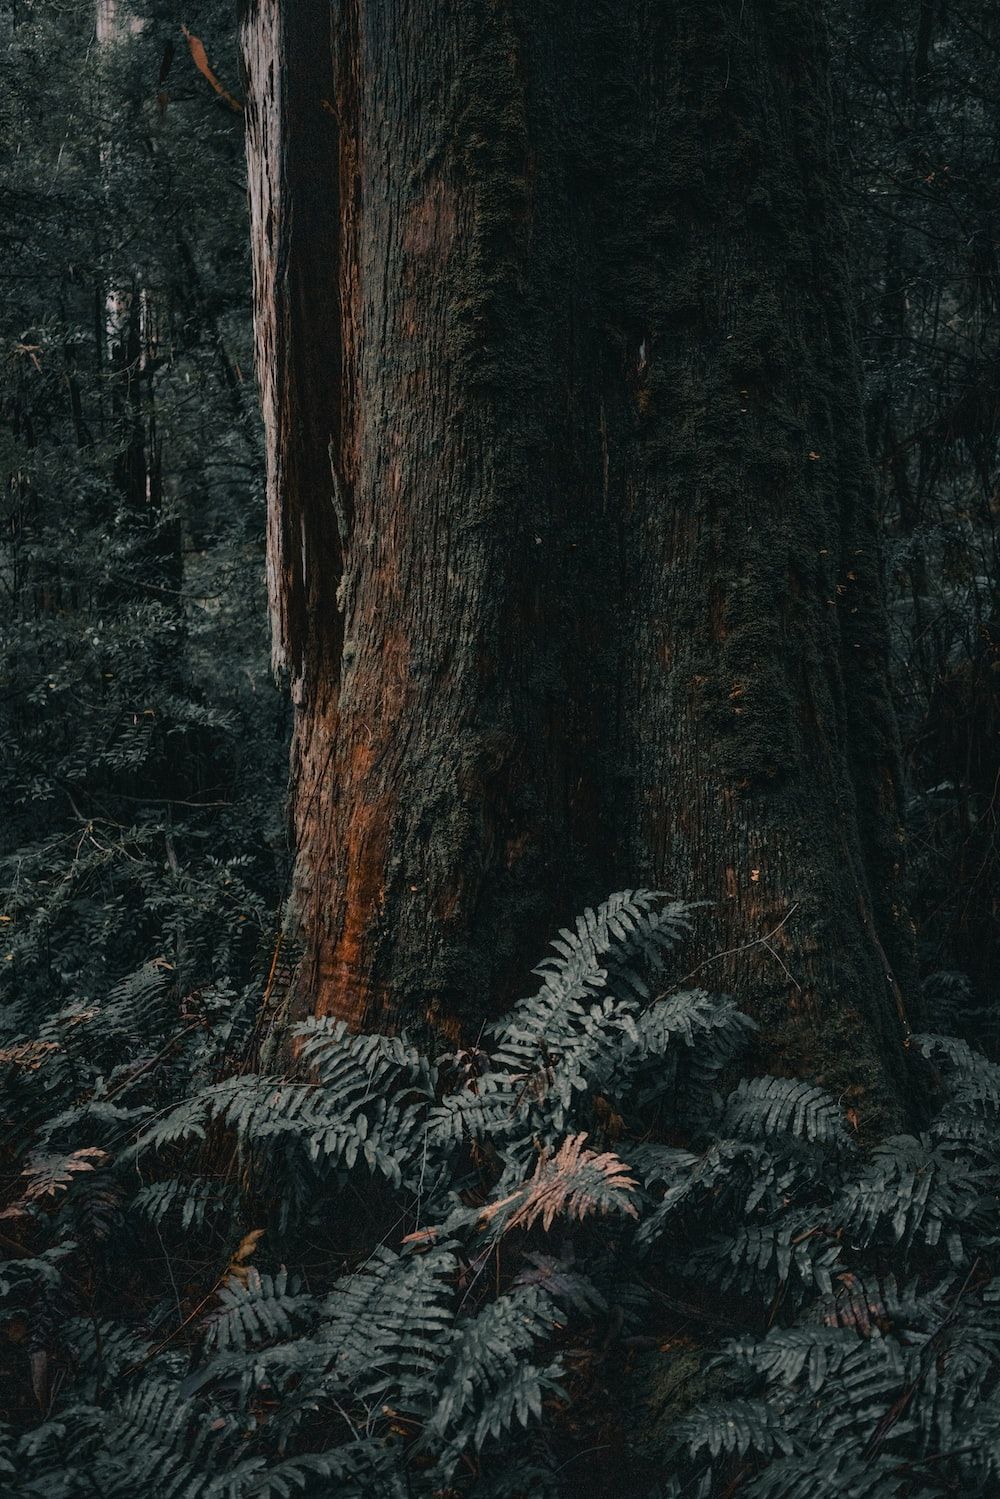 A tree trunk in a forest surrounded by ferns - Woods